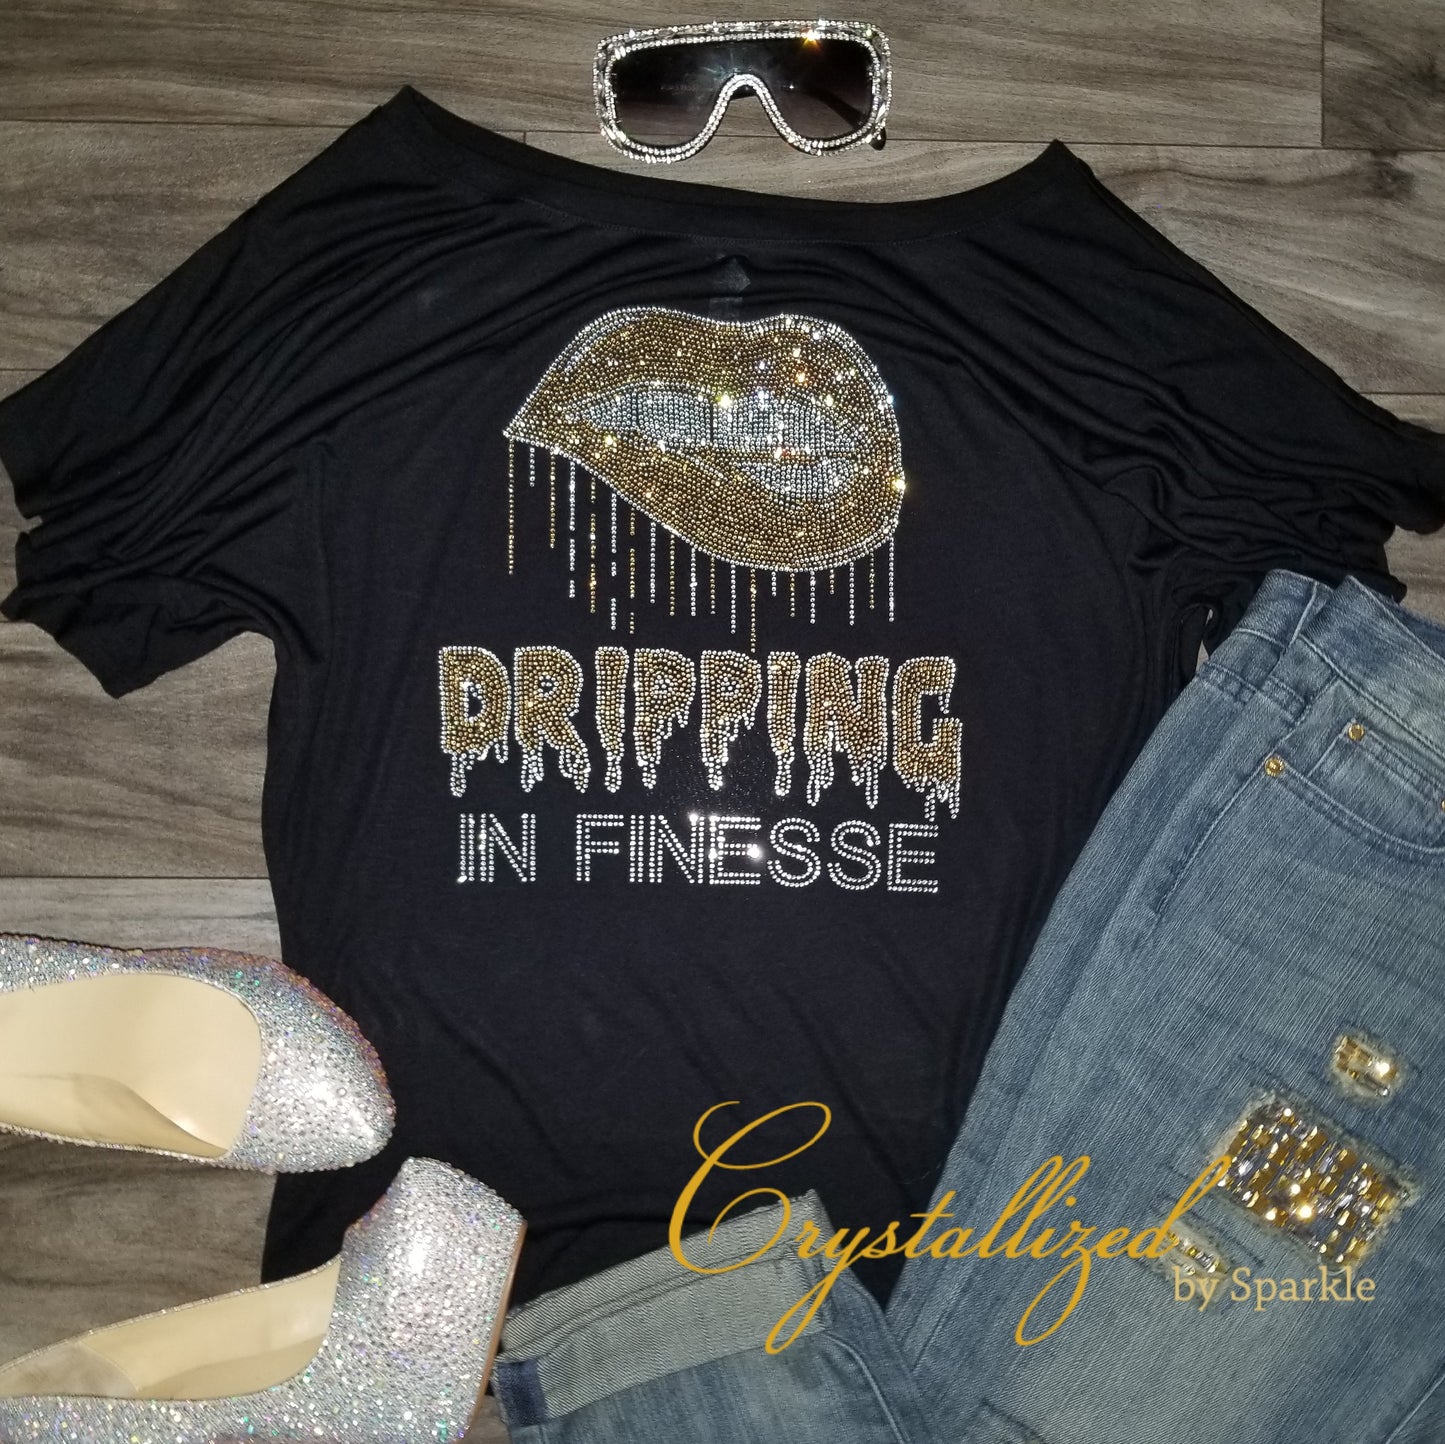 Dripping In Finesse Crystallized Tee